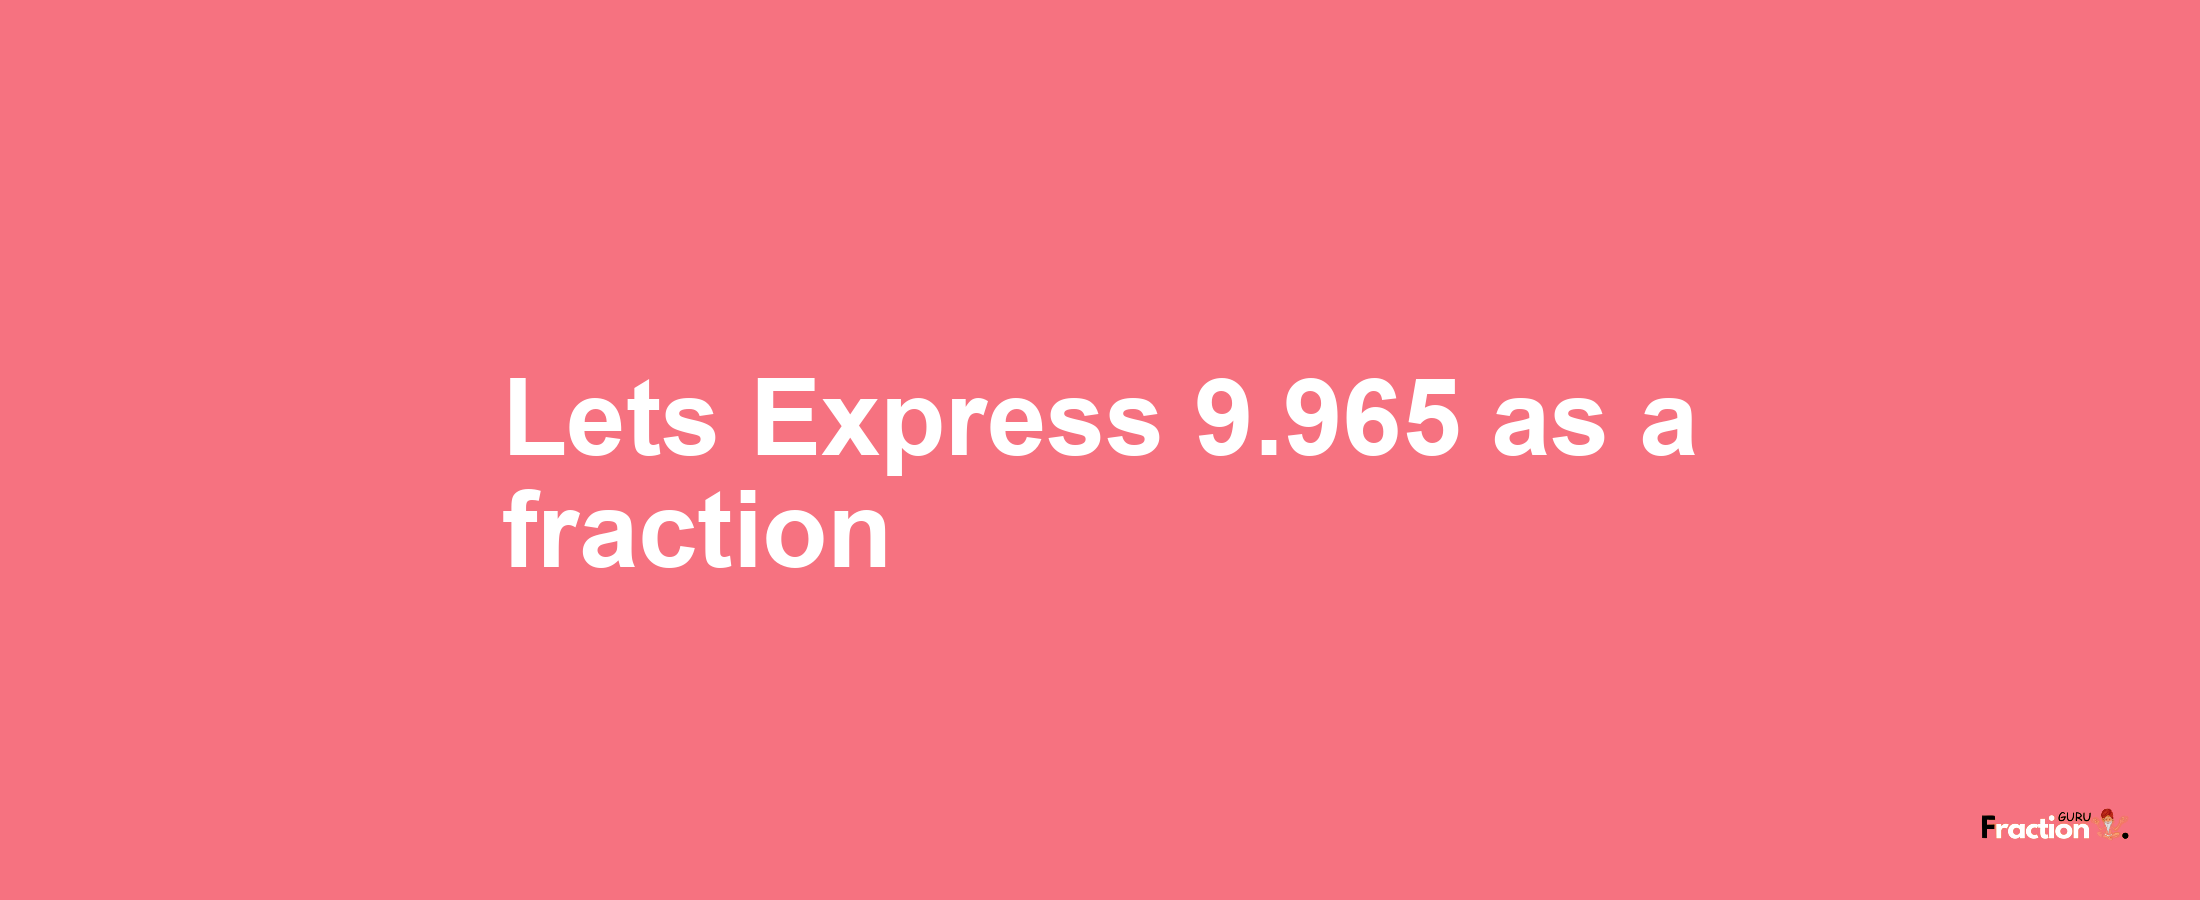 Lets Express 9.965 as afraction